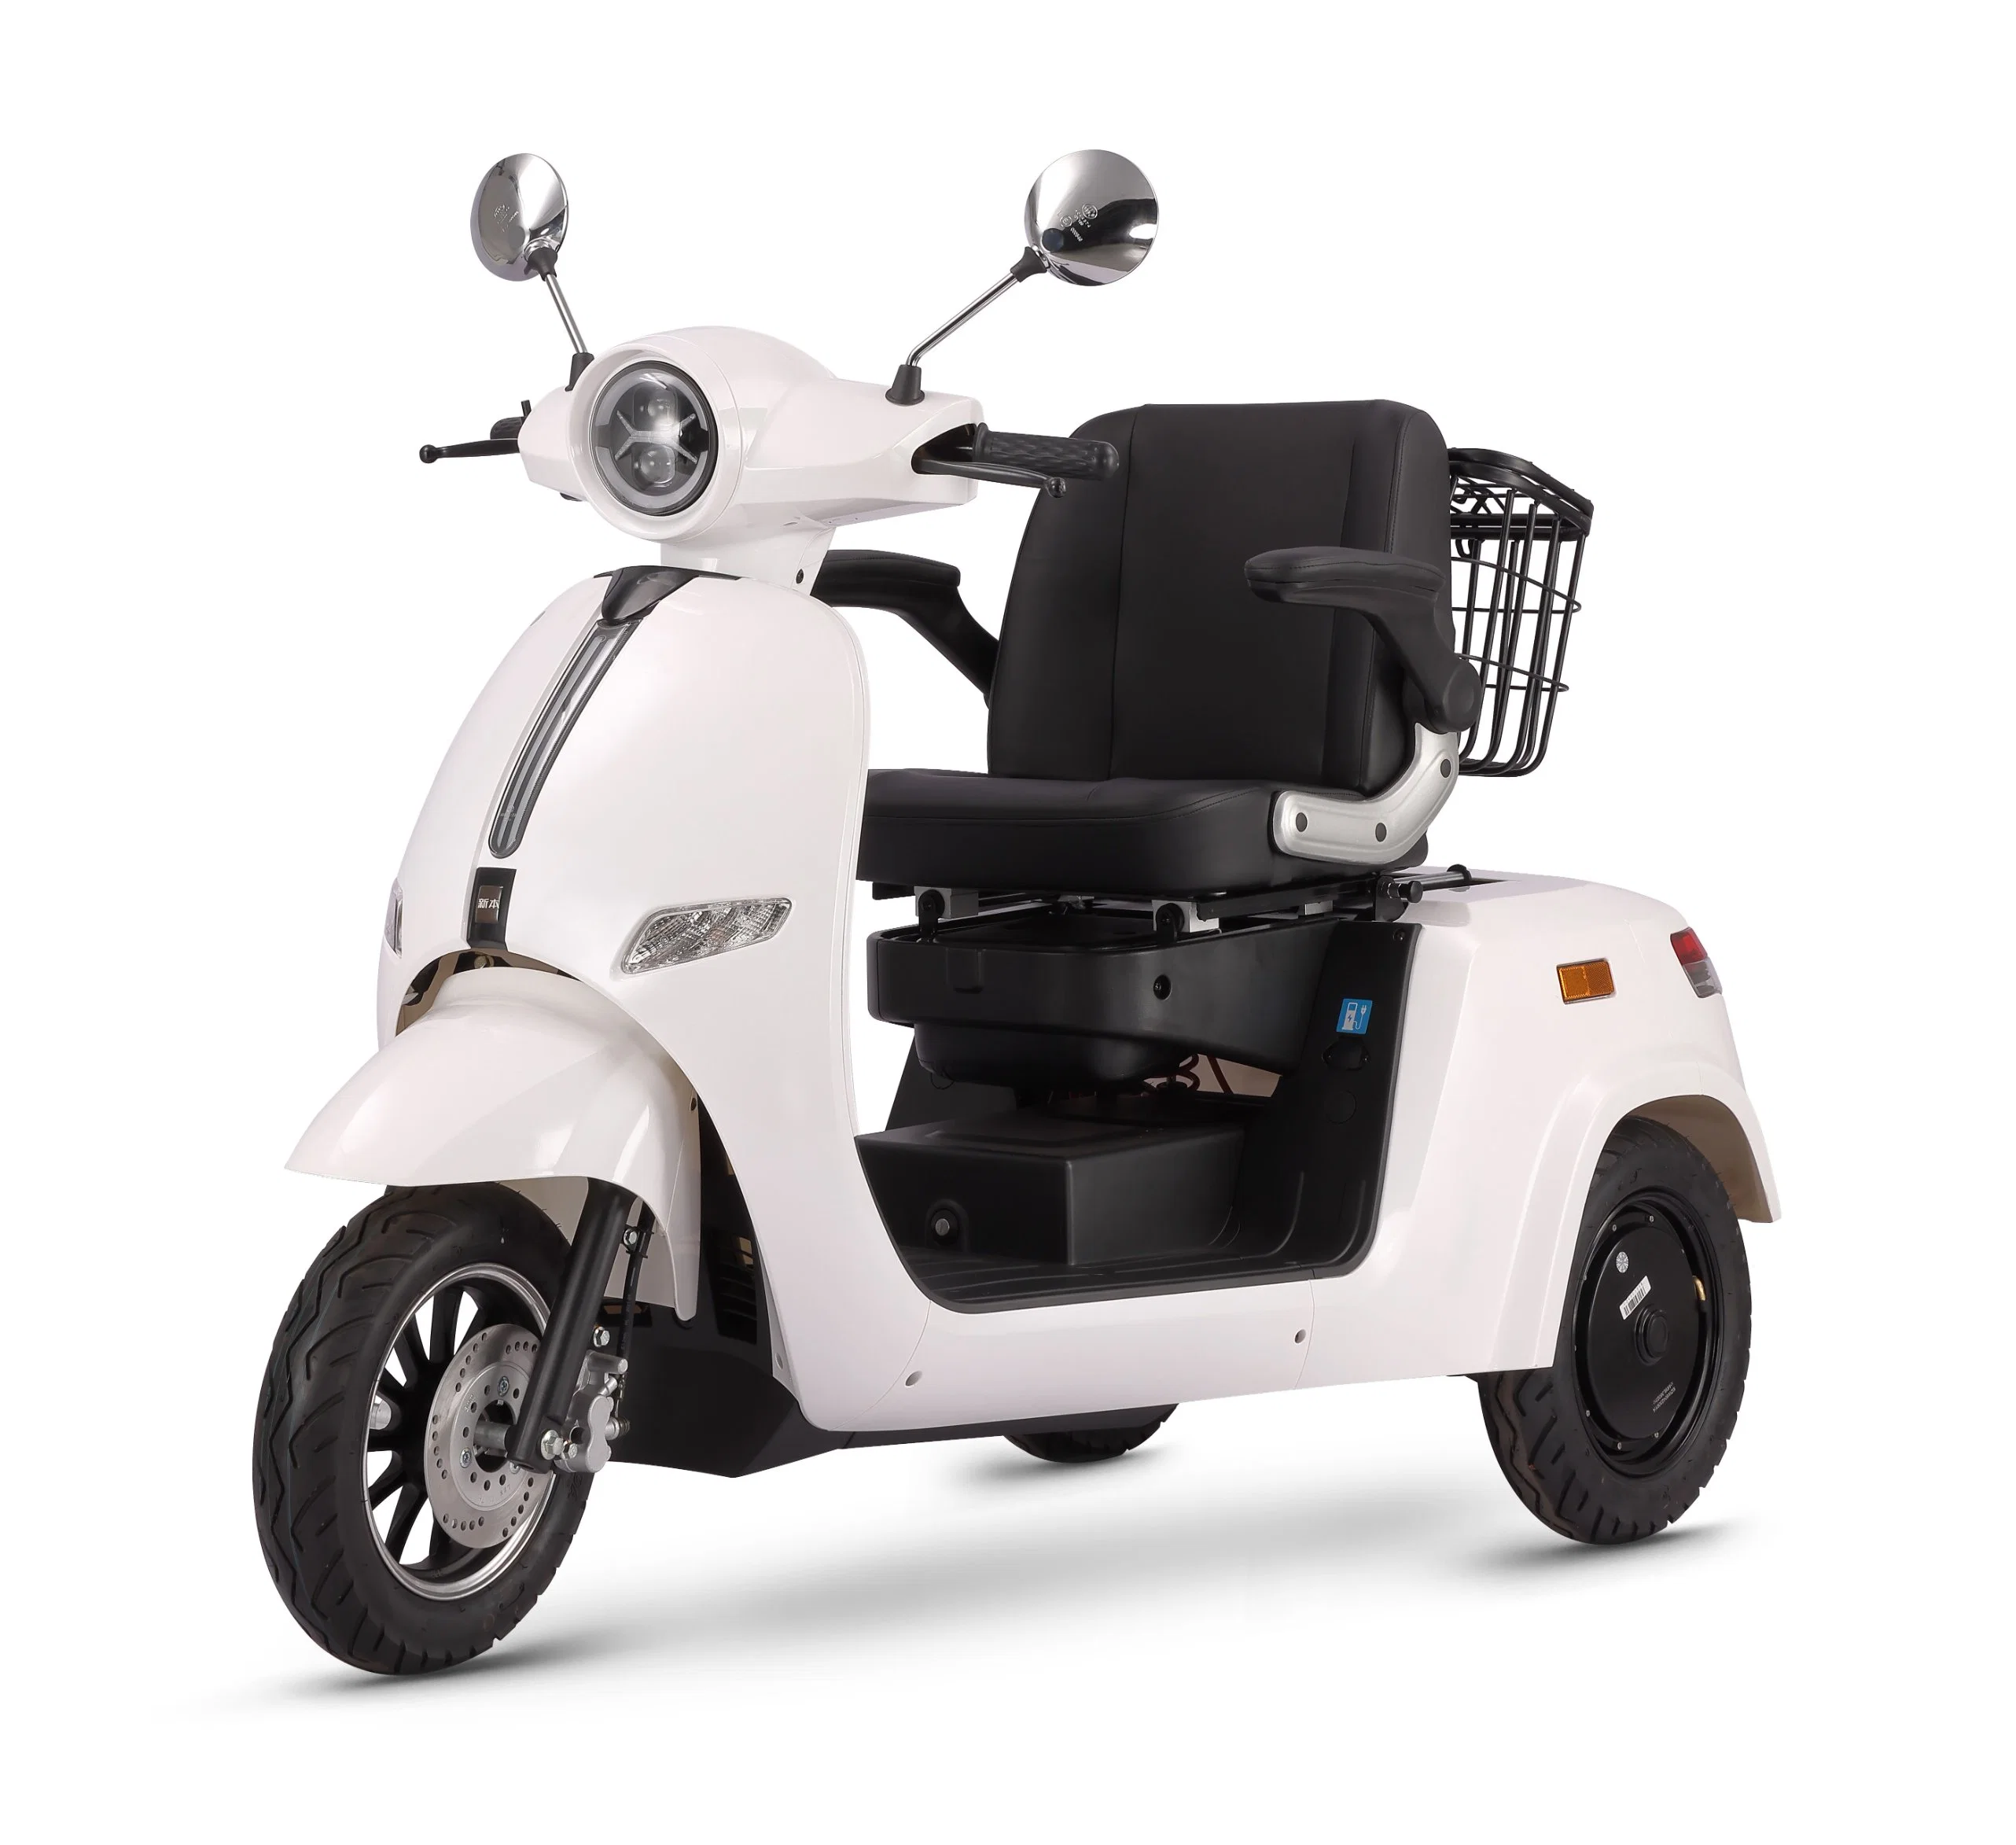 Widely Used Adult 3 Wheel Electric Scooter Tuk Tuk 3 Wheel Motorcycle Electric Bike Tricycle